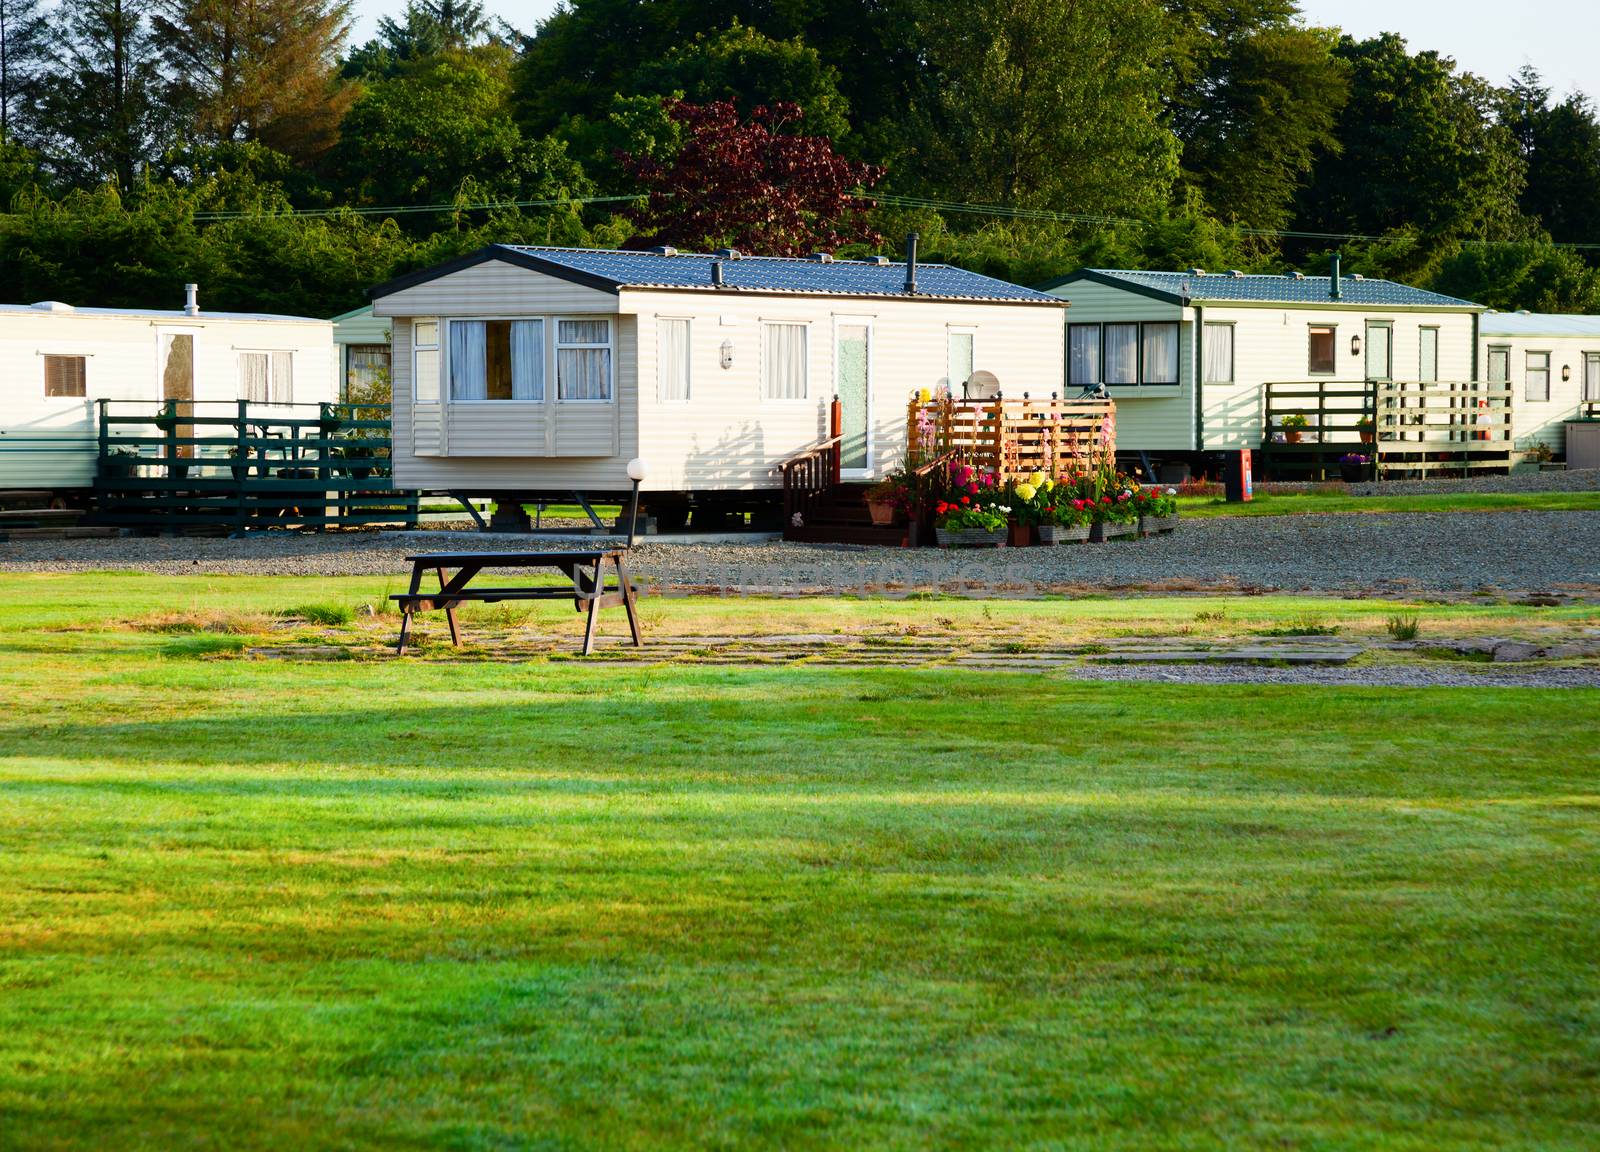 Cabins at holiday park in Scotland